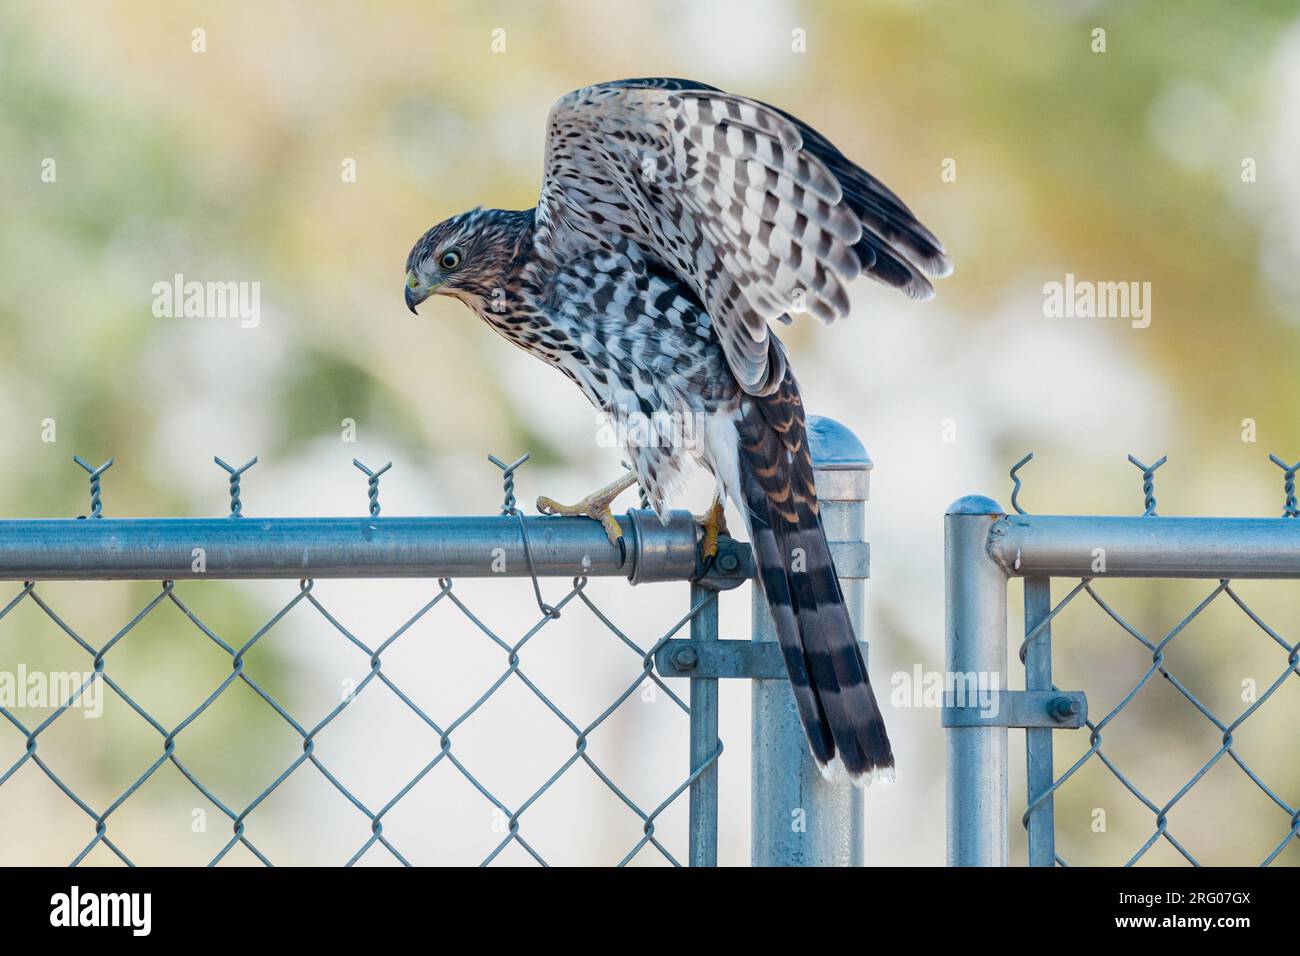 An immature Cooper's hawk (Accipiter cooperii) sits on a fence and stretches its wings.. Stock Photo